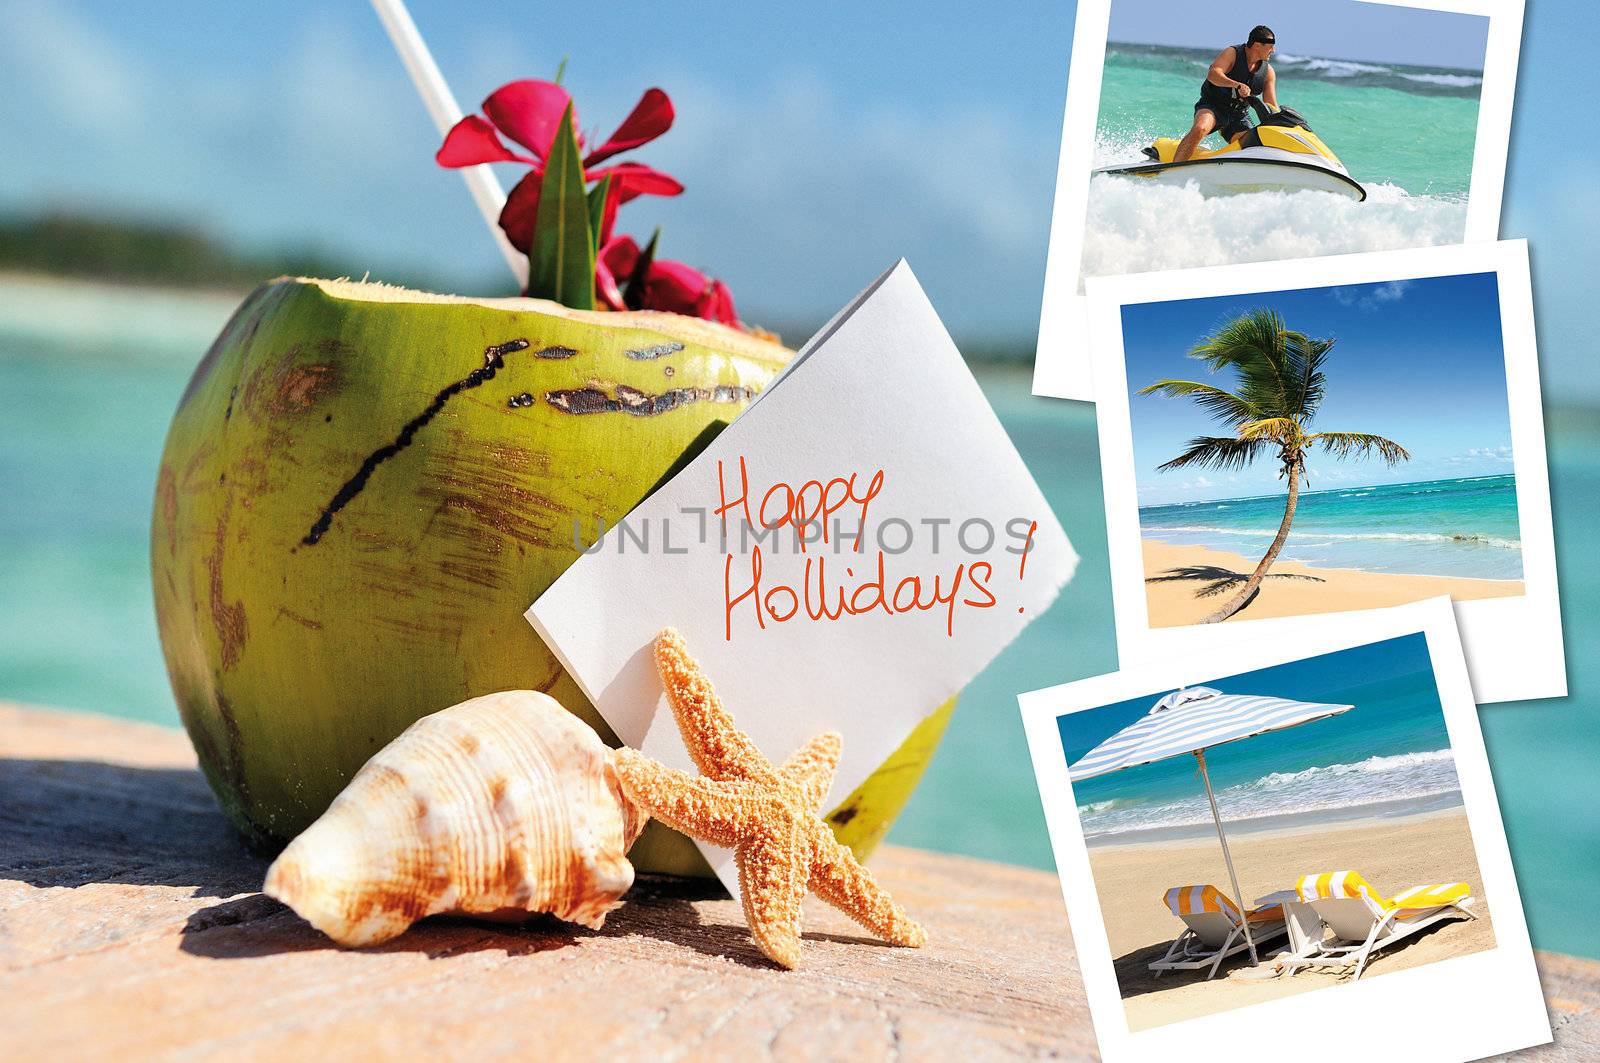 coconuts cocktail, starfish, sea outdoor with hlidays pics